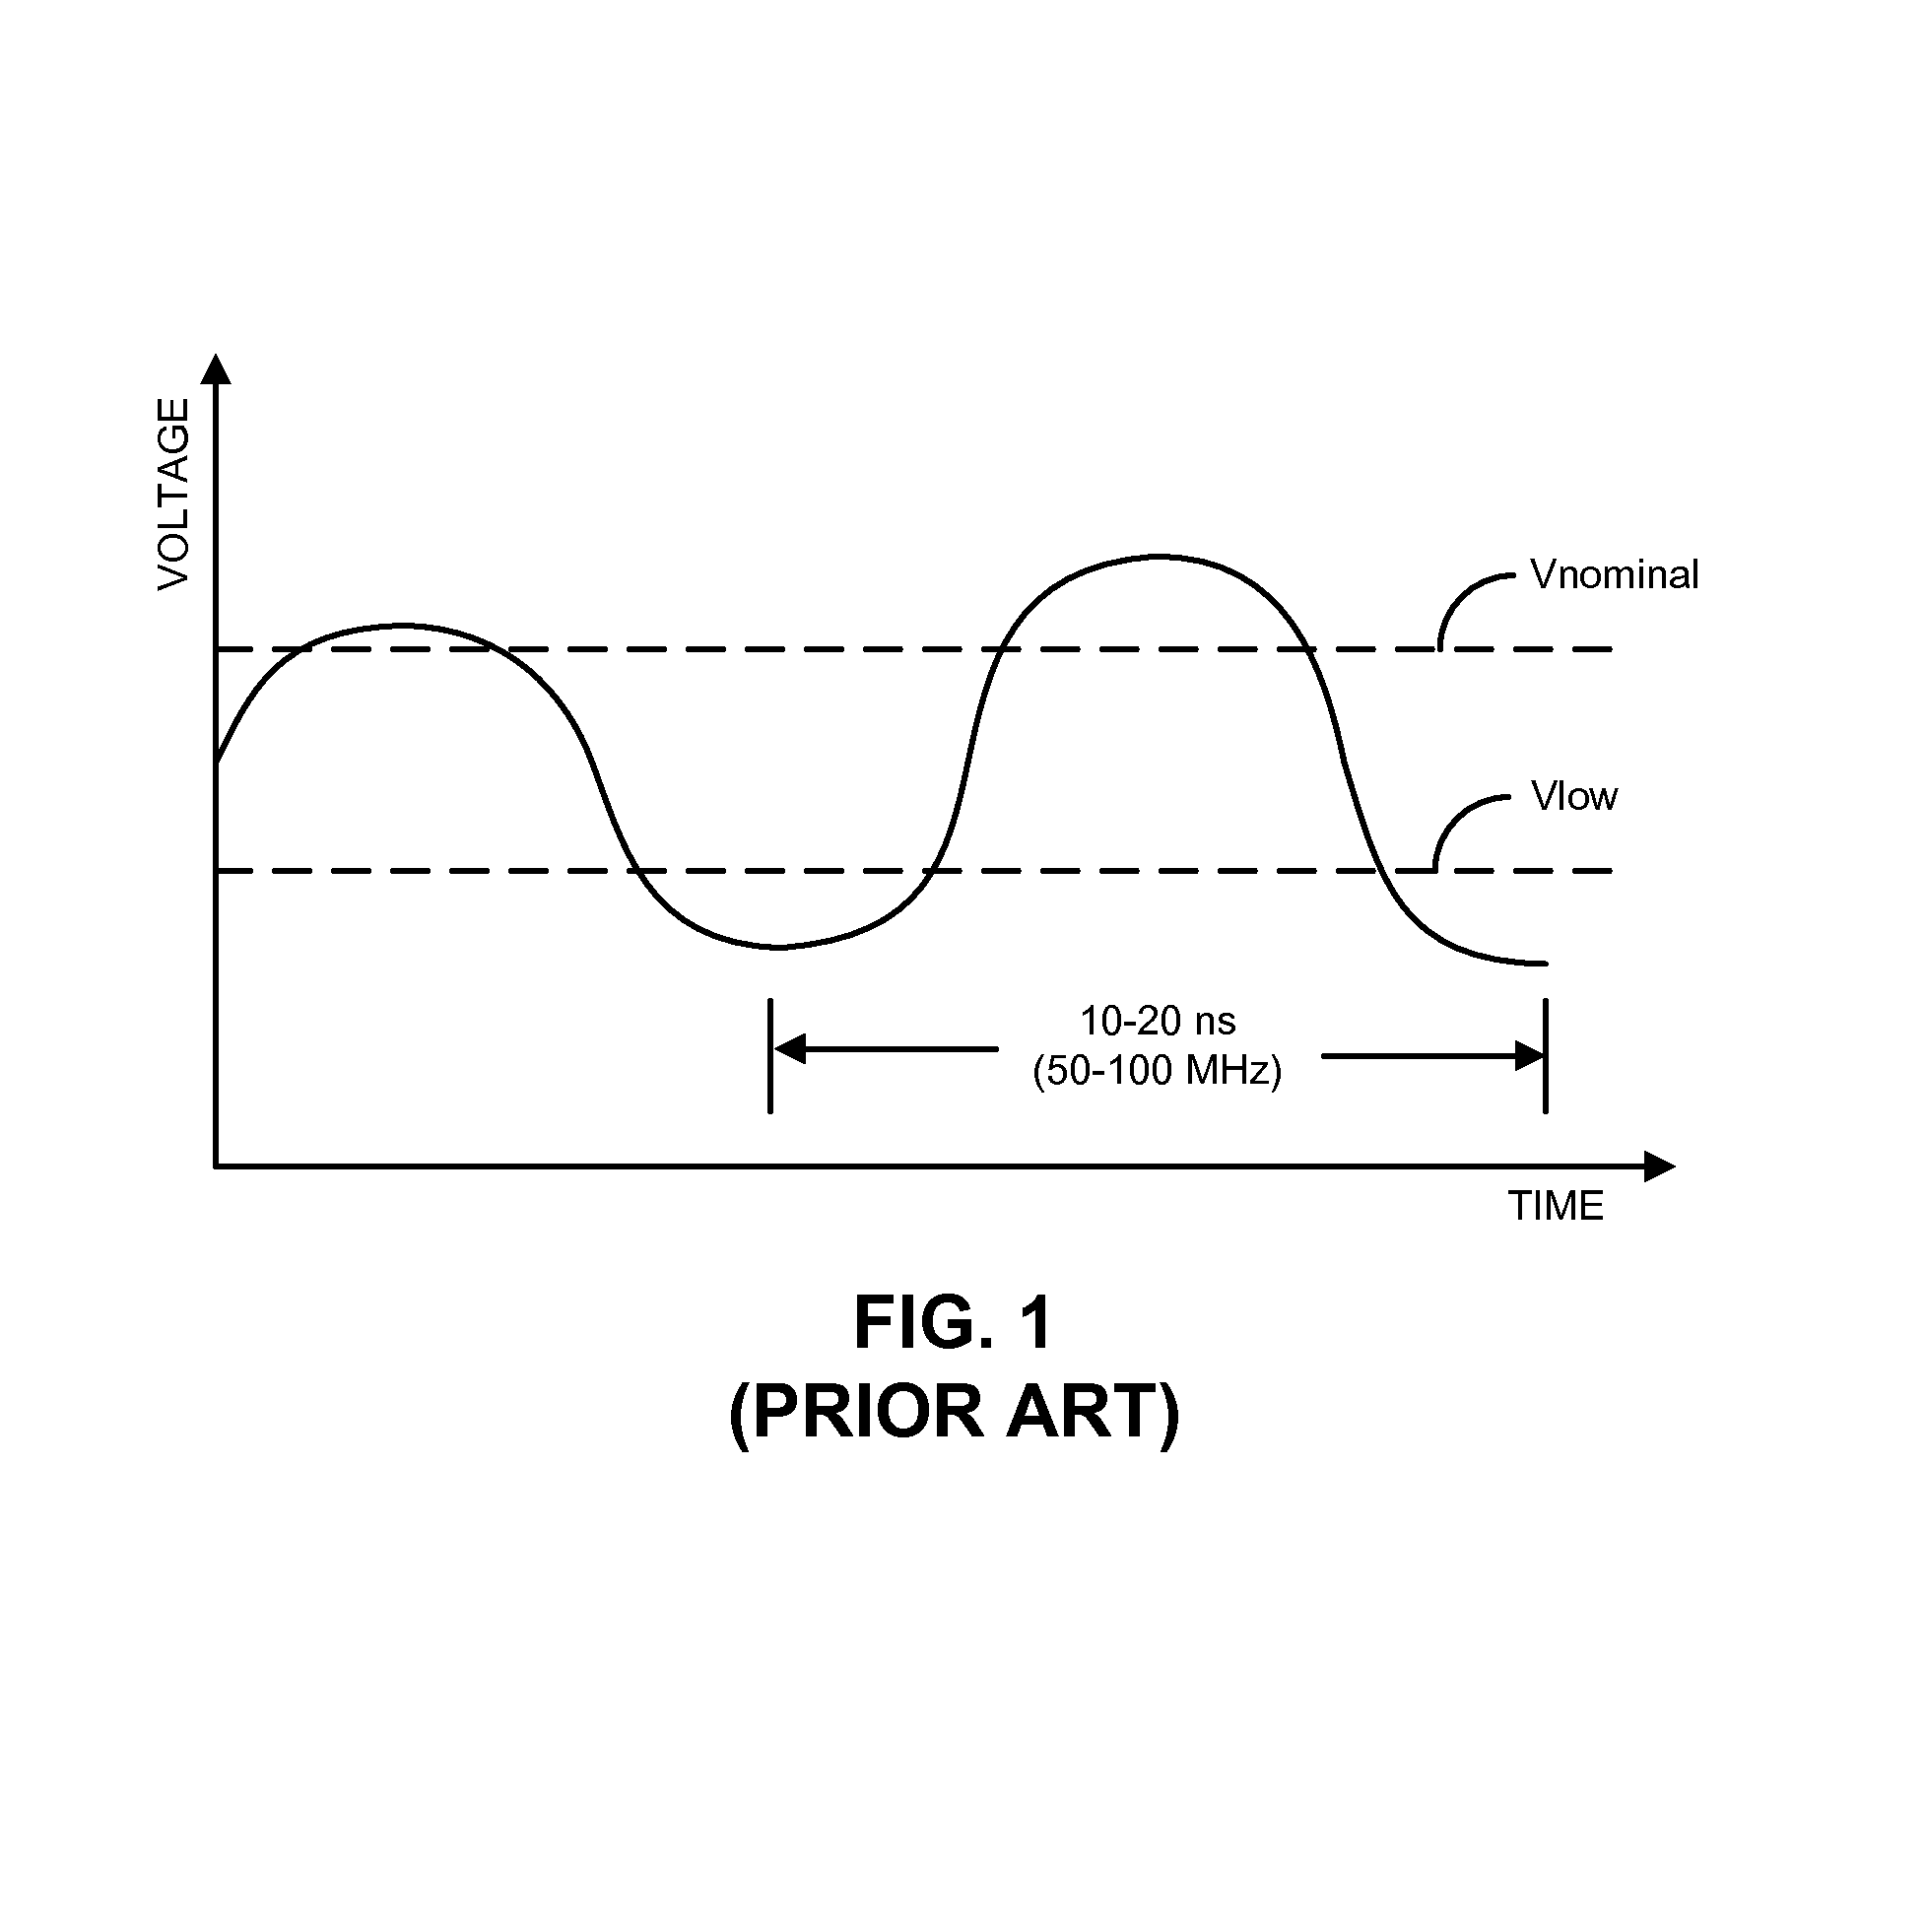 Noise suppression using an asymmetric frequency-locked loop